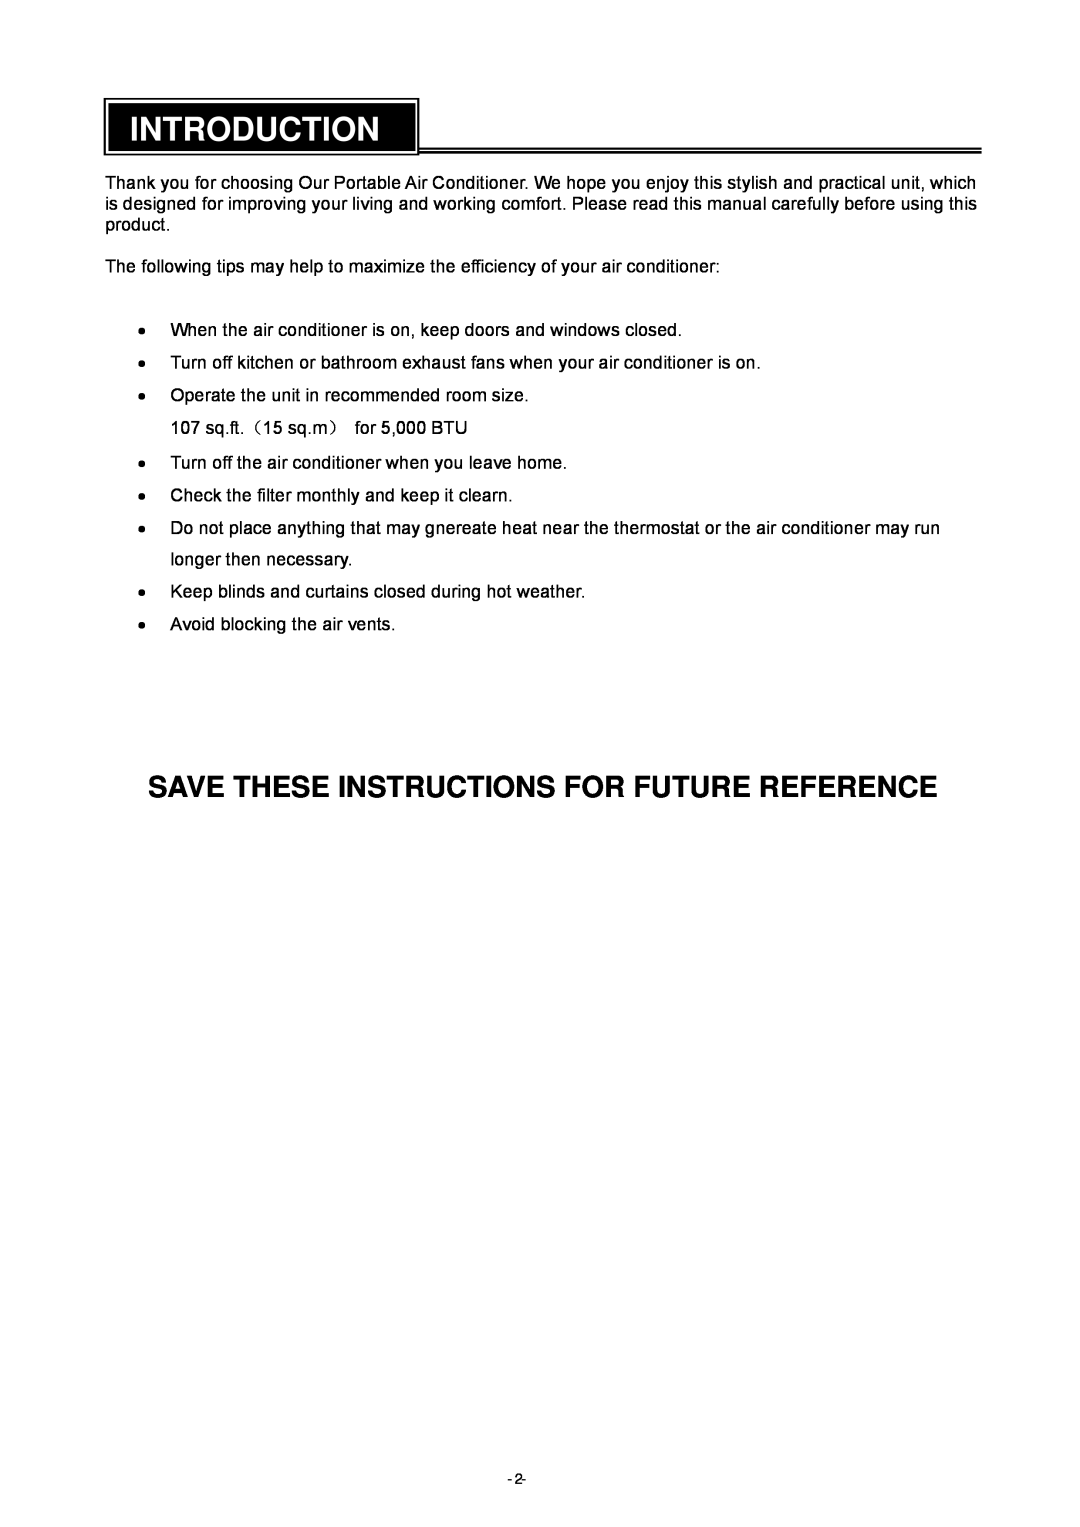 Brada Appliances YPM-06C instruction manual Introduction, Save These Instructions For Future Reference 